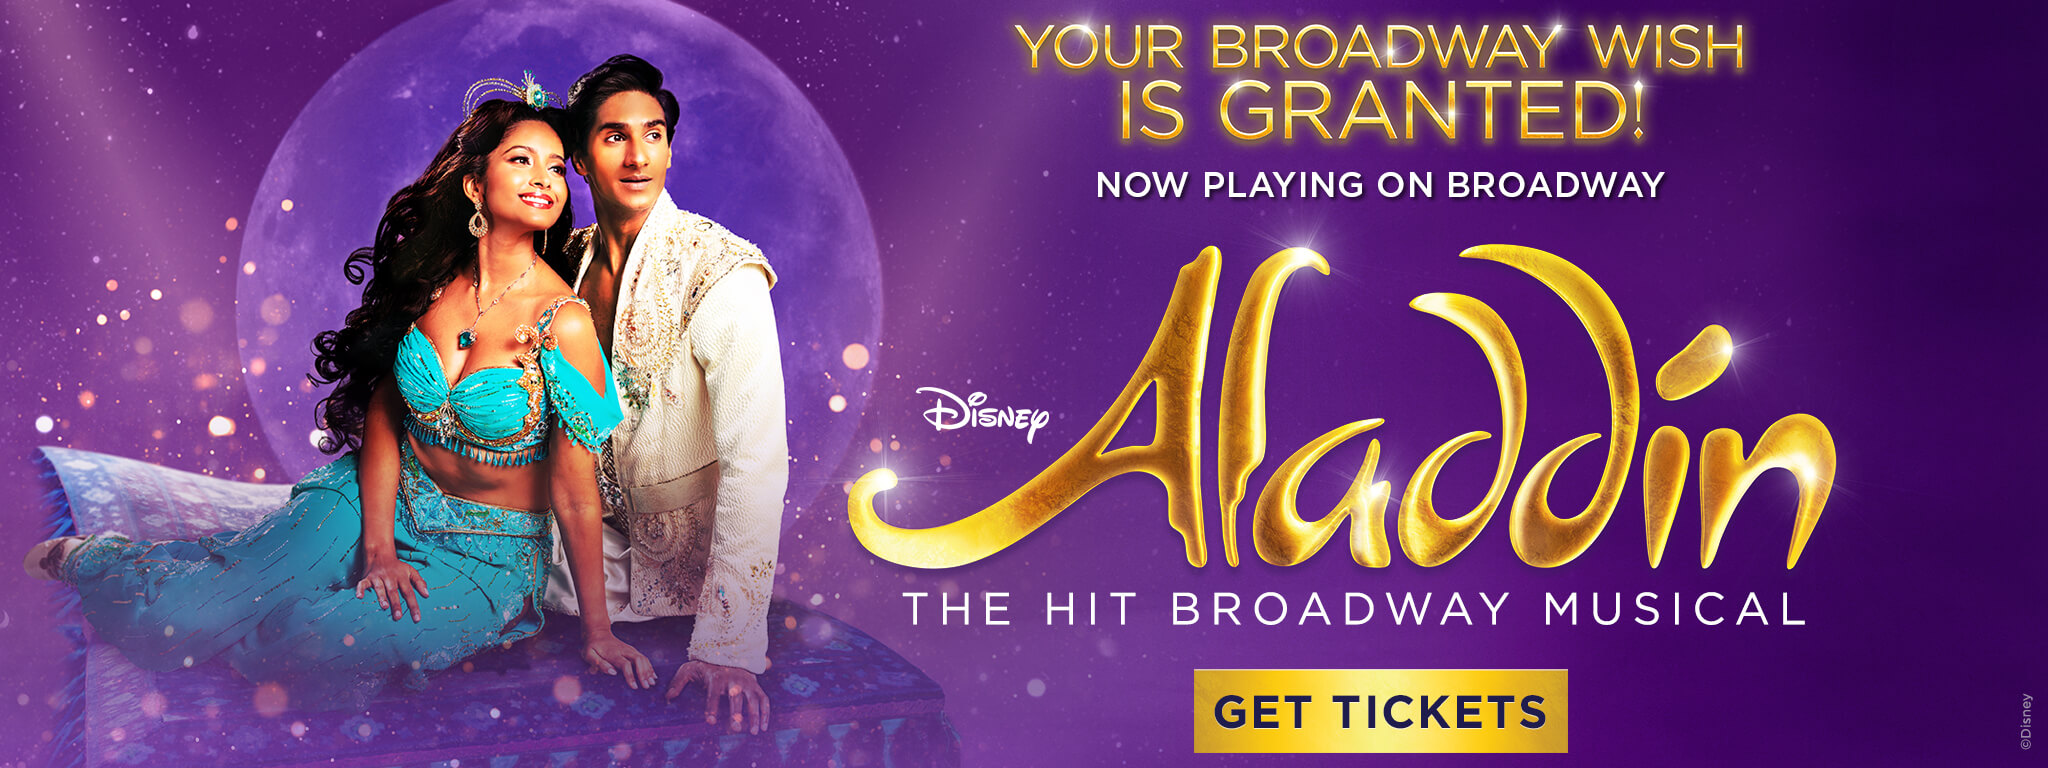 Your Broadway Wish Is Granted! Now Playing on Broadway